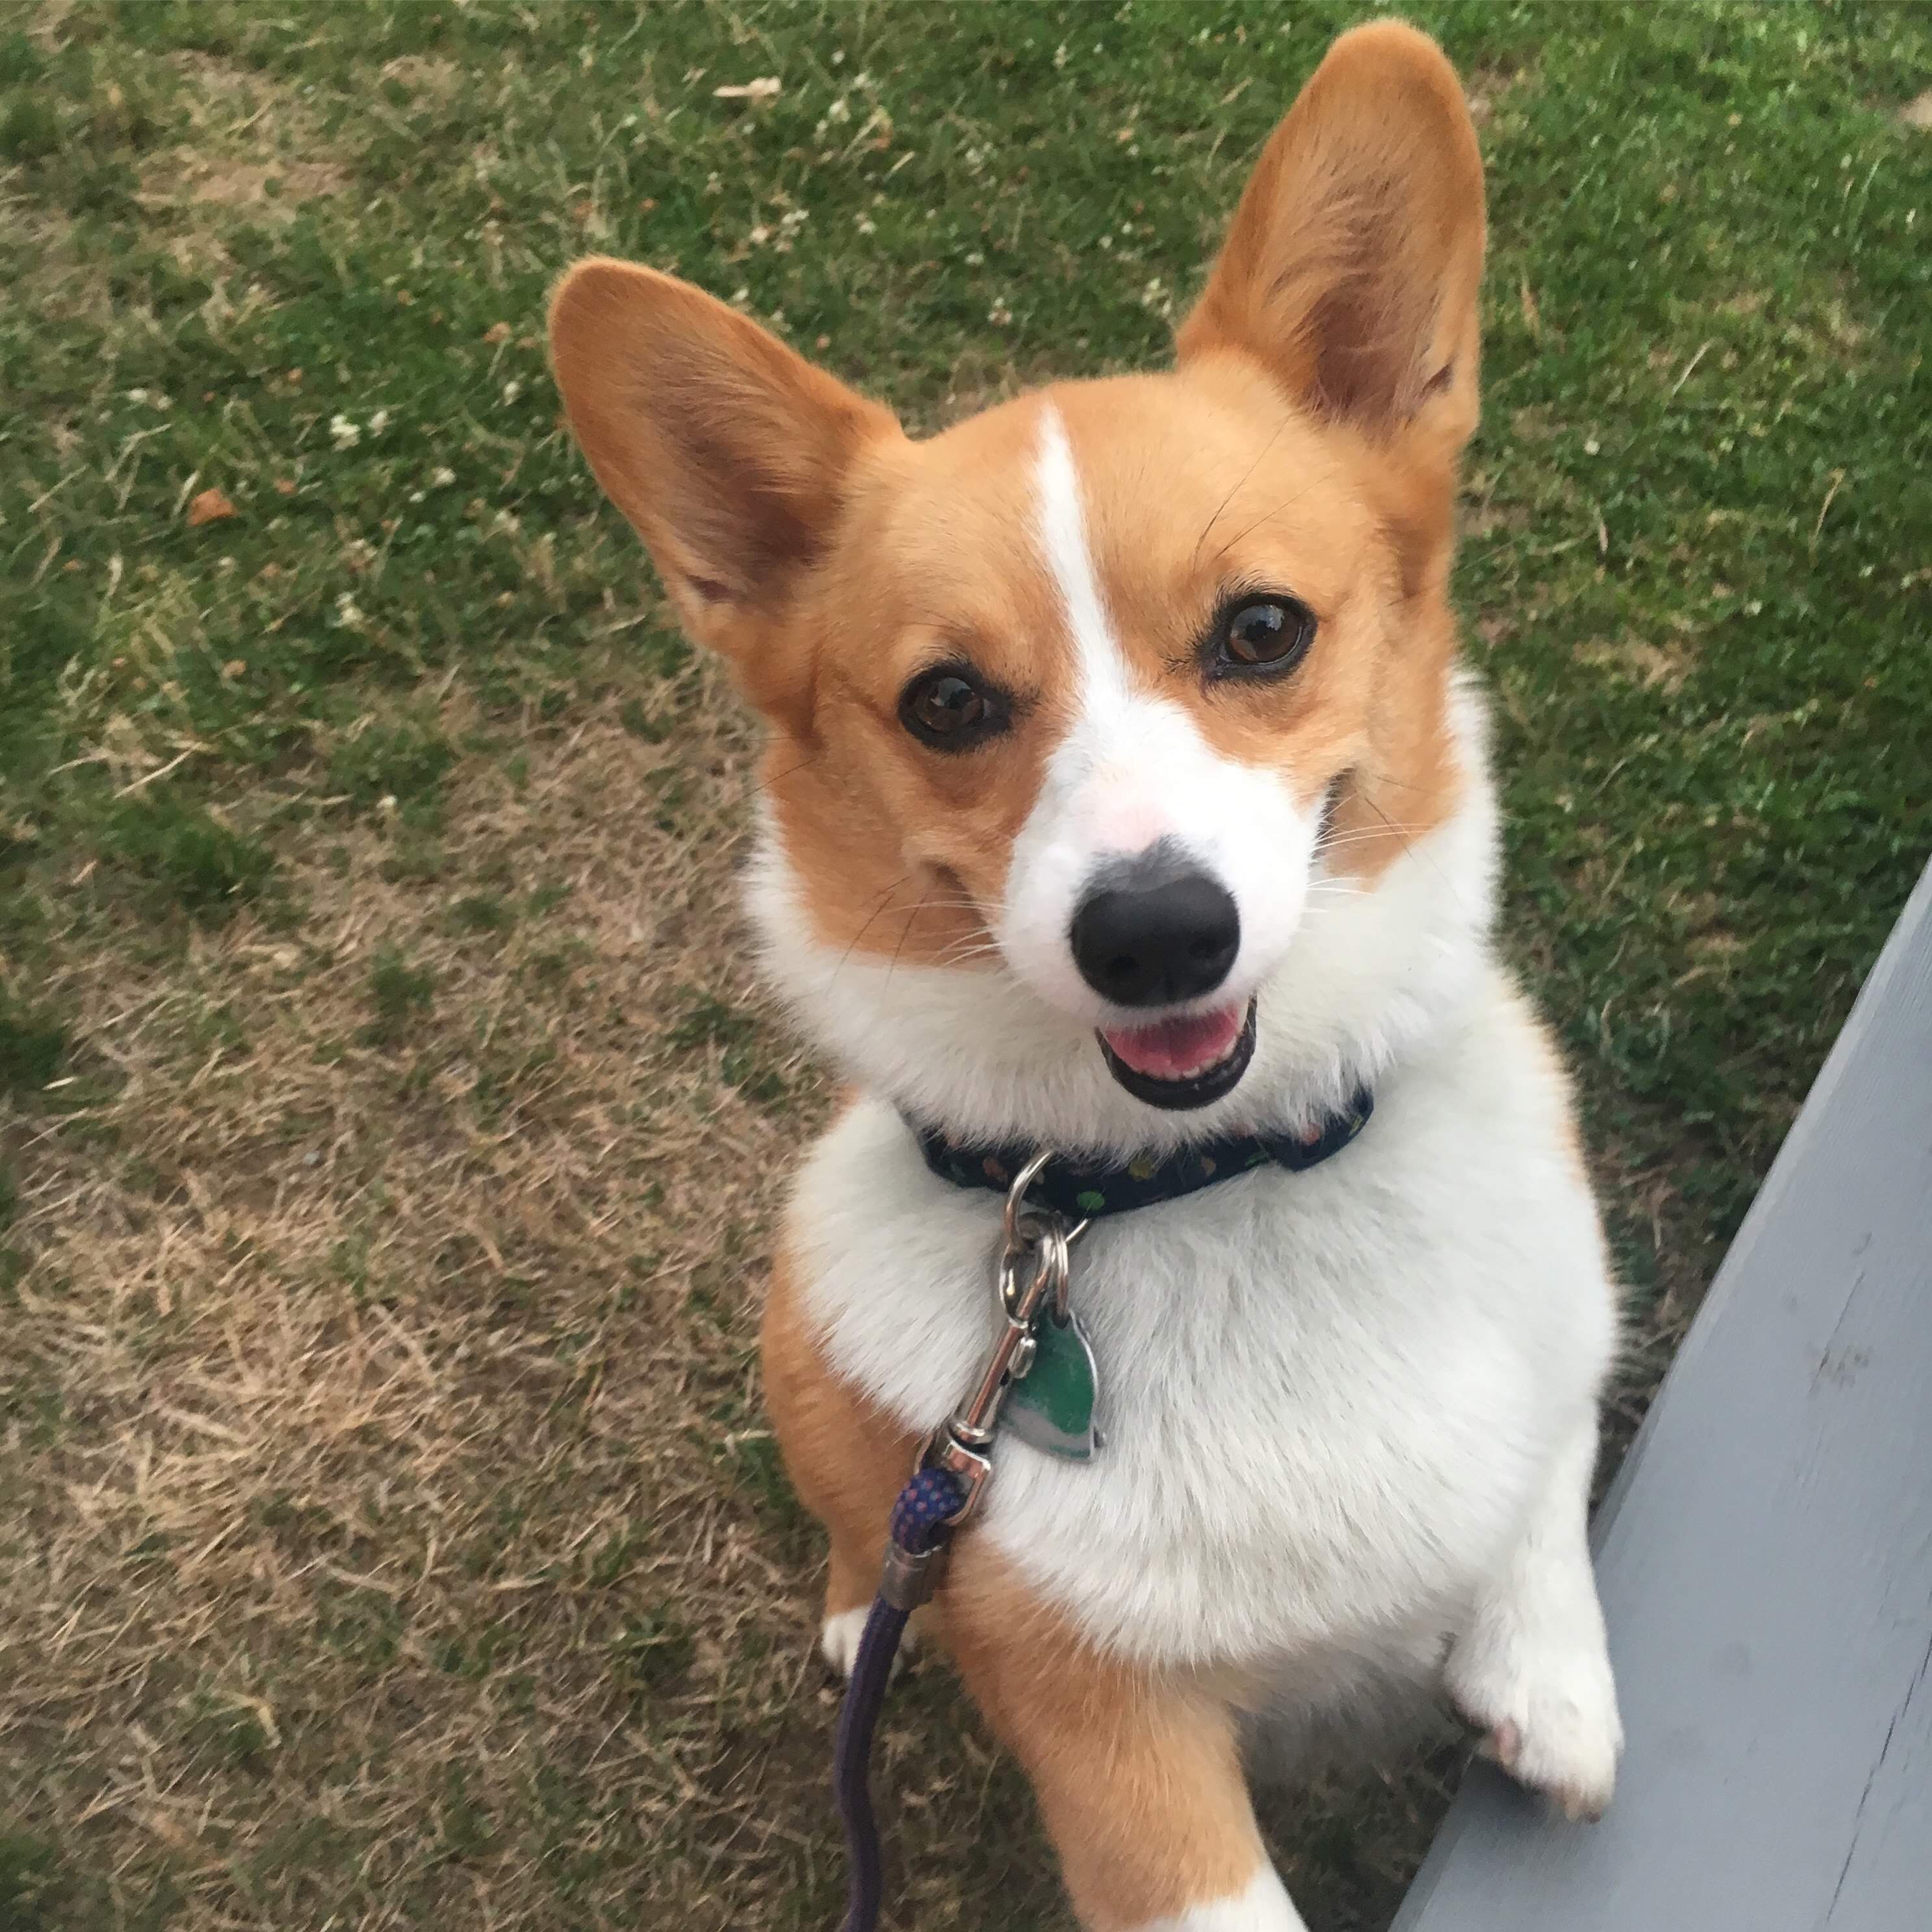 A Corgi named Toast standing up leaning on the bench while smiling